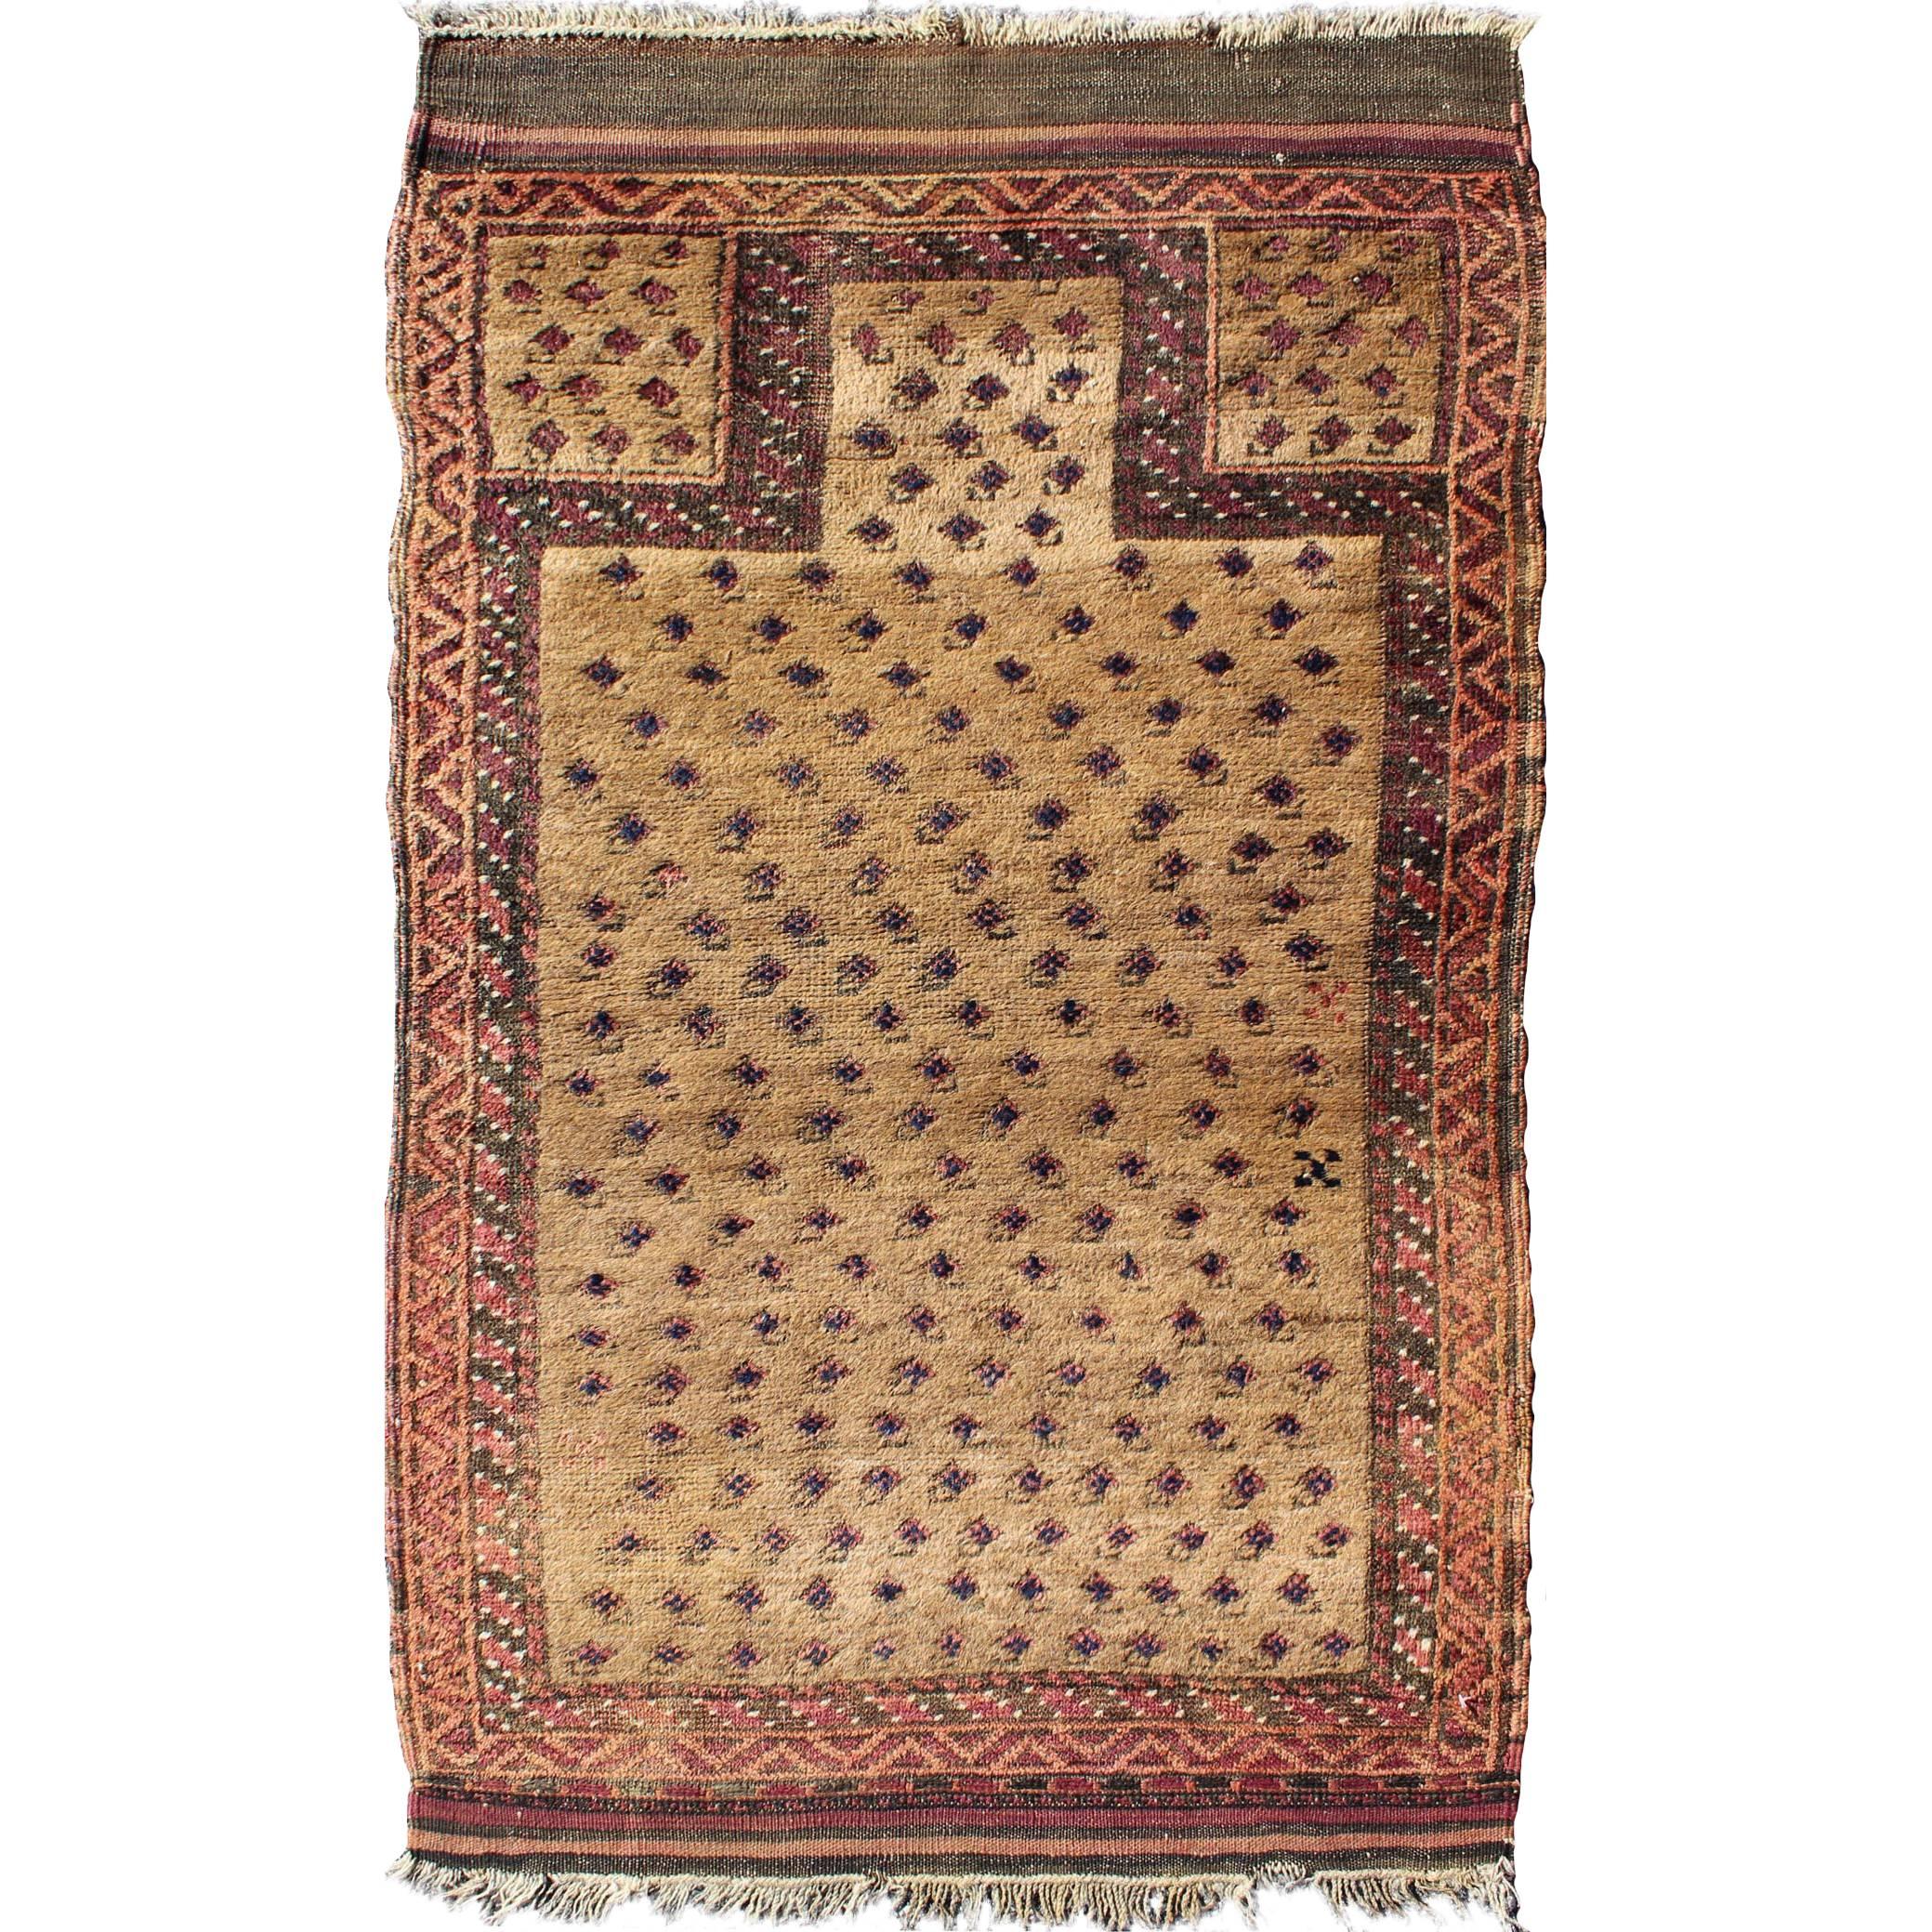 Tribal Afghan Antique Beluch Prayer Rug with All-Over Paisley Pattern in Camel